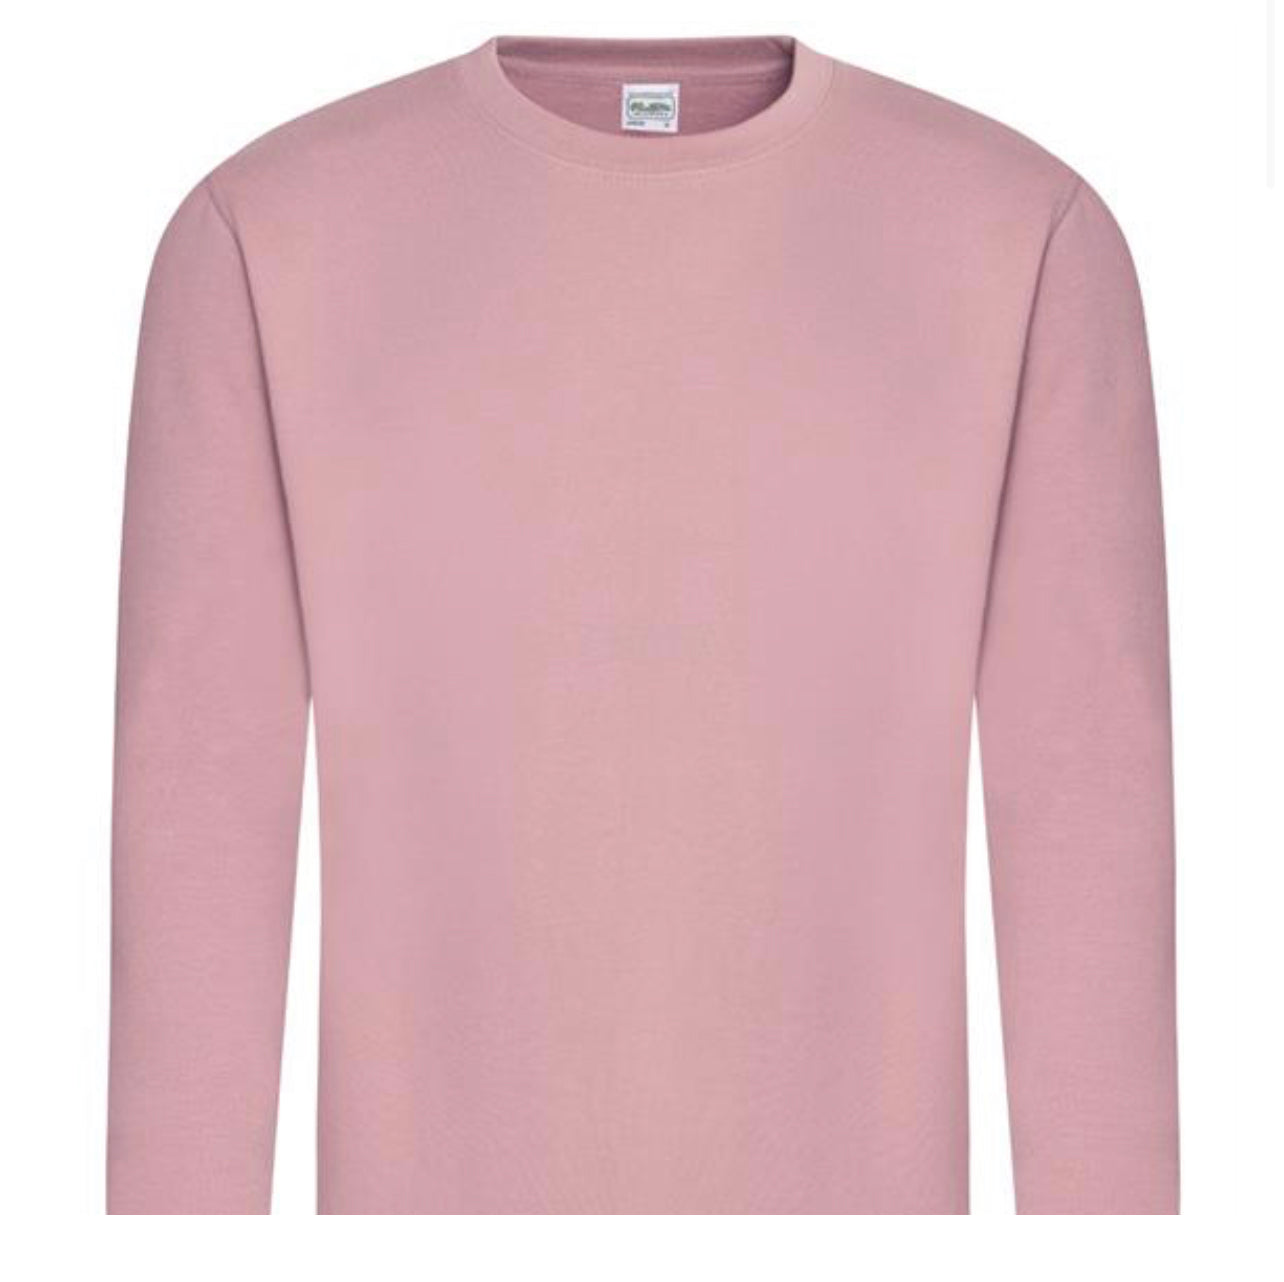 My Favourite Colour Is October Adult Sweater